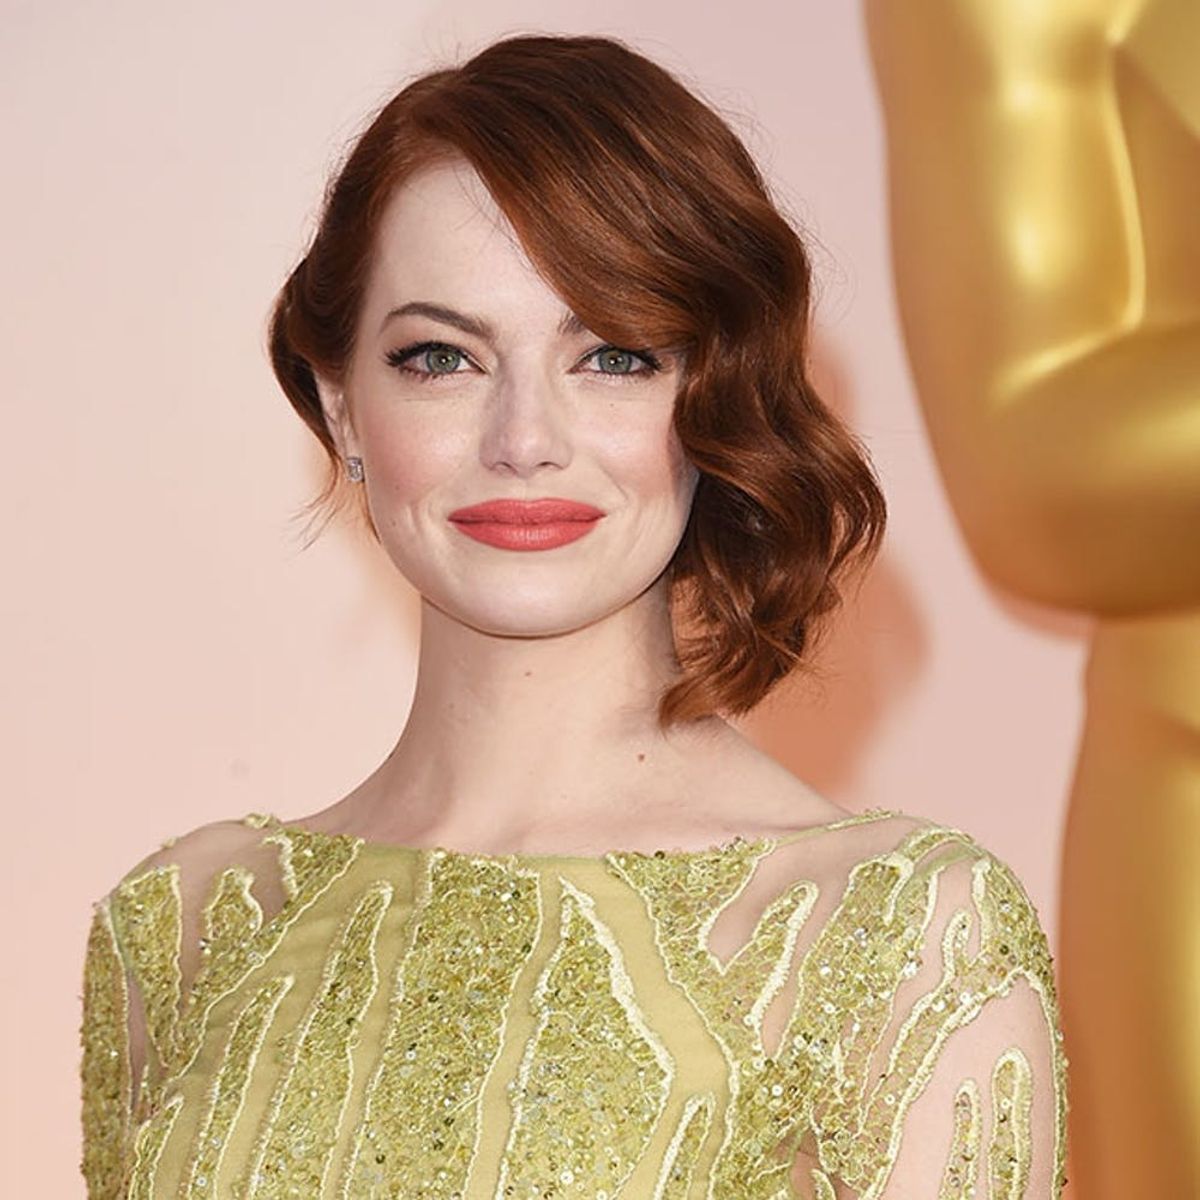 All of Spring’s Best Lipsticks from the Oscars + How to Wear Them